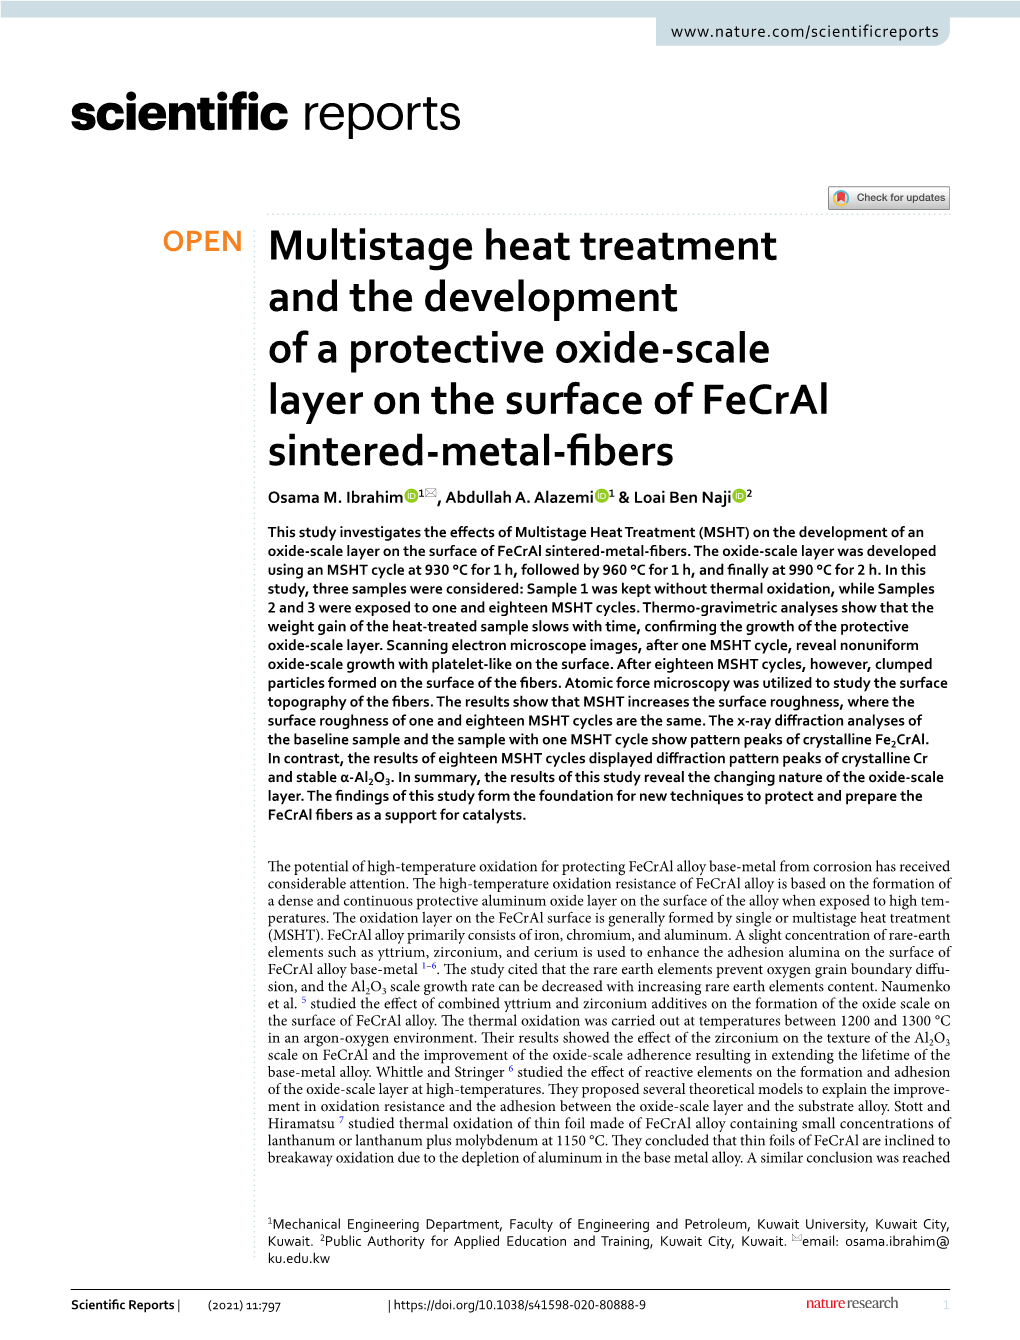 Multistage Heat Treatment and the Development of a Protective Oxide-Scale Layer on the Surface of Fecral Sintered-Metal-Fibers